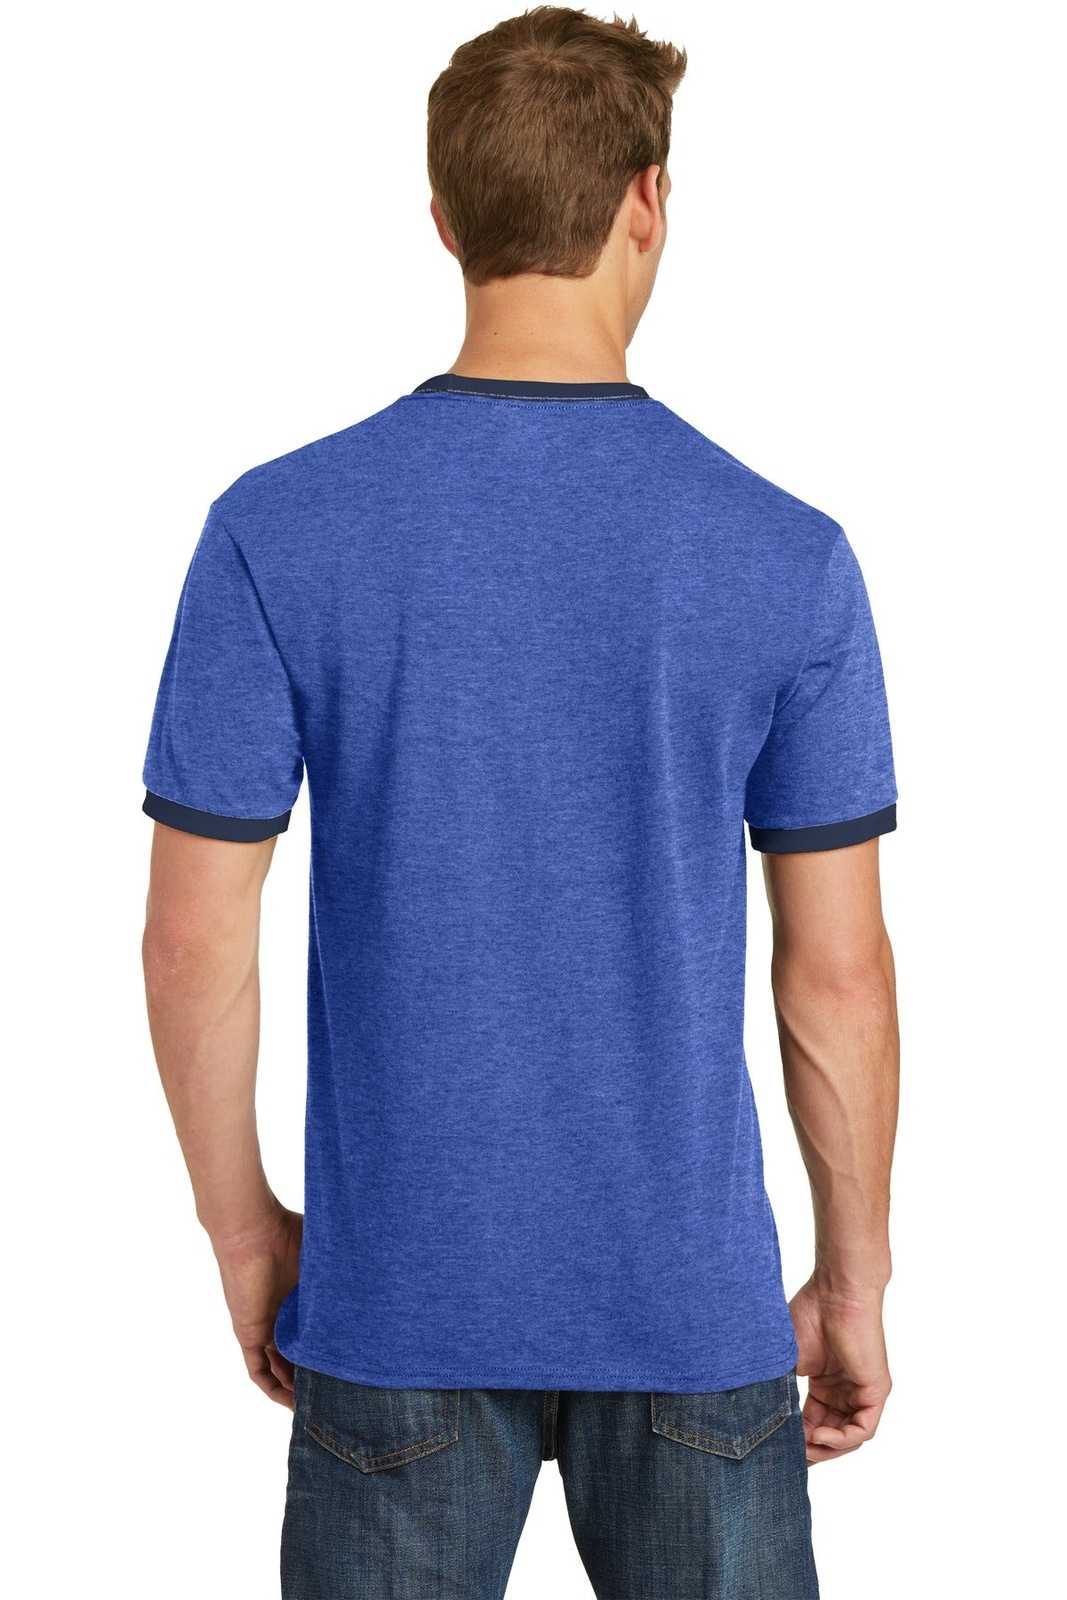 Port & Company PC54R Core Cotton Ringer Tee - Heather Royal Navy - HIT a Double - 1